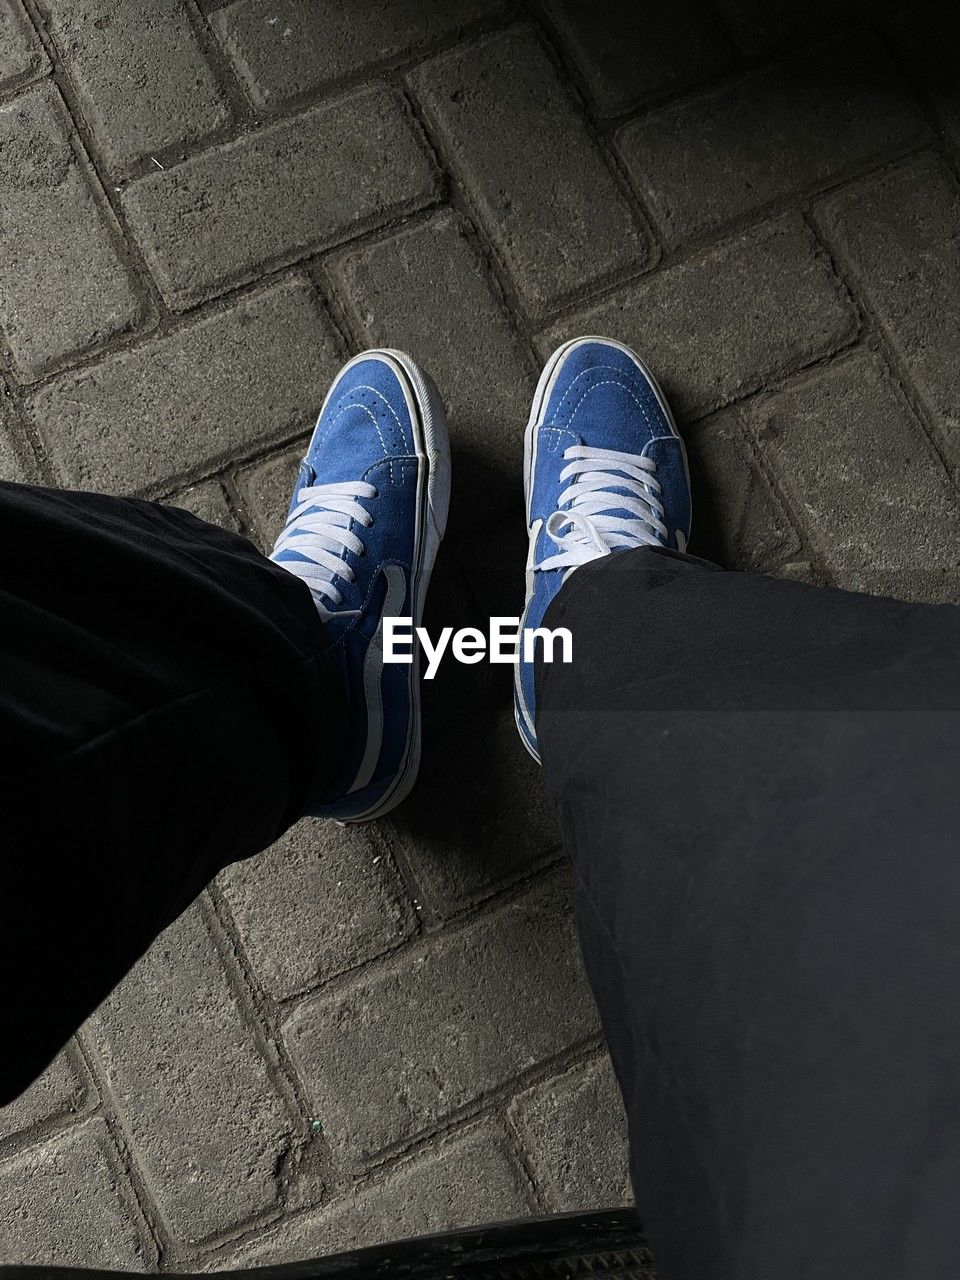 black, low section, shoe, human leg, blue, white, one person, limb, footwear, human limb, high angle view, standing, lifestyles, footpath, personal perspective, men, adult, city, darkness, street, clothing, day, leisure activity, casual clothing, outdoors, human foot, directly above, jeans, sneakers, sidewalk